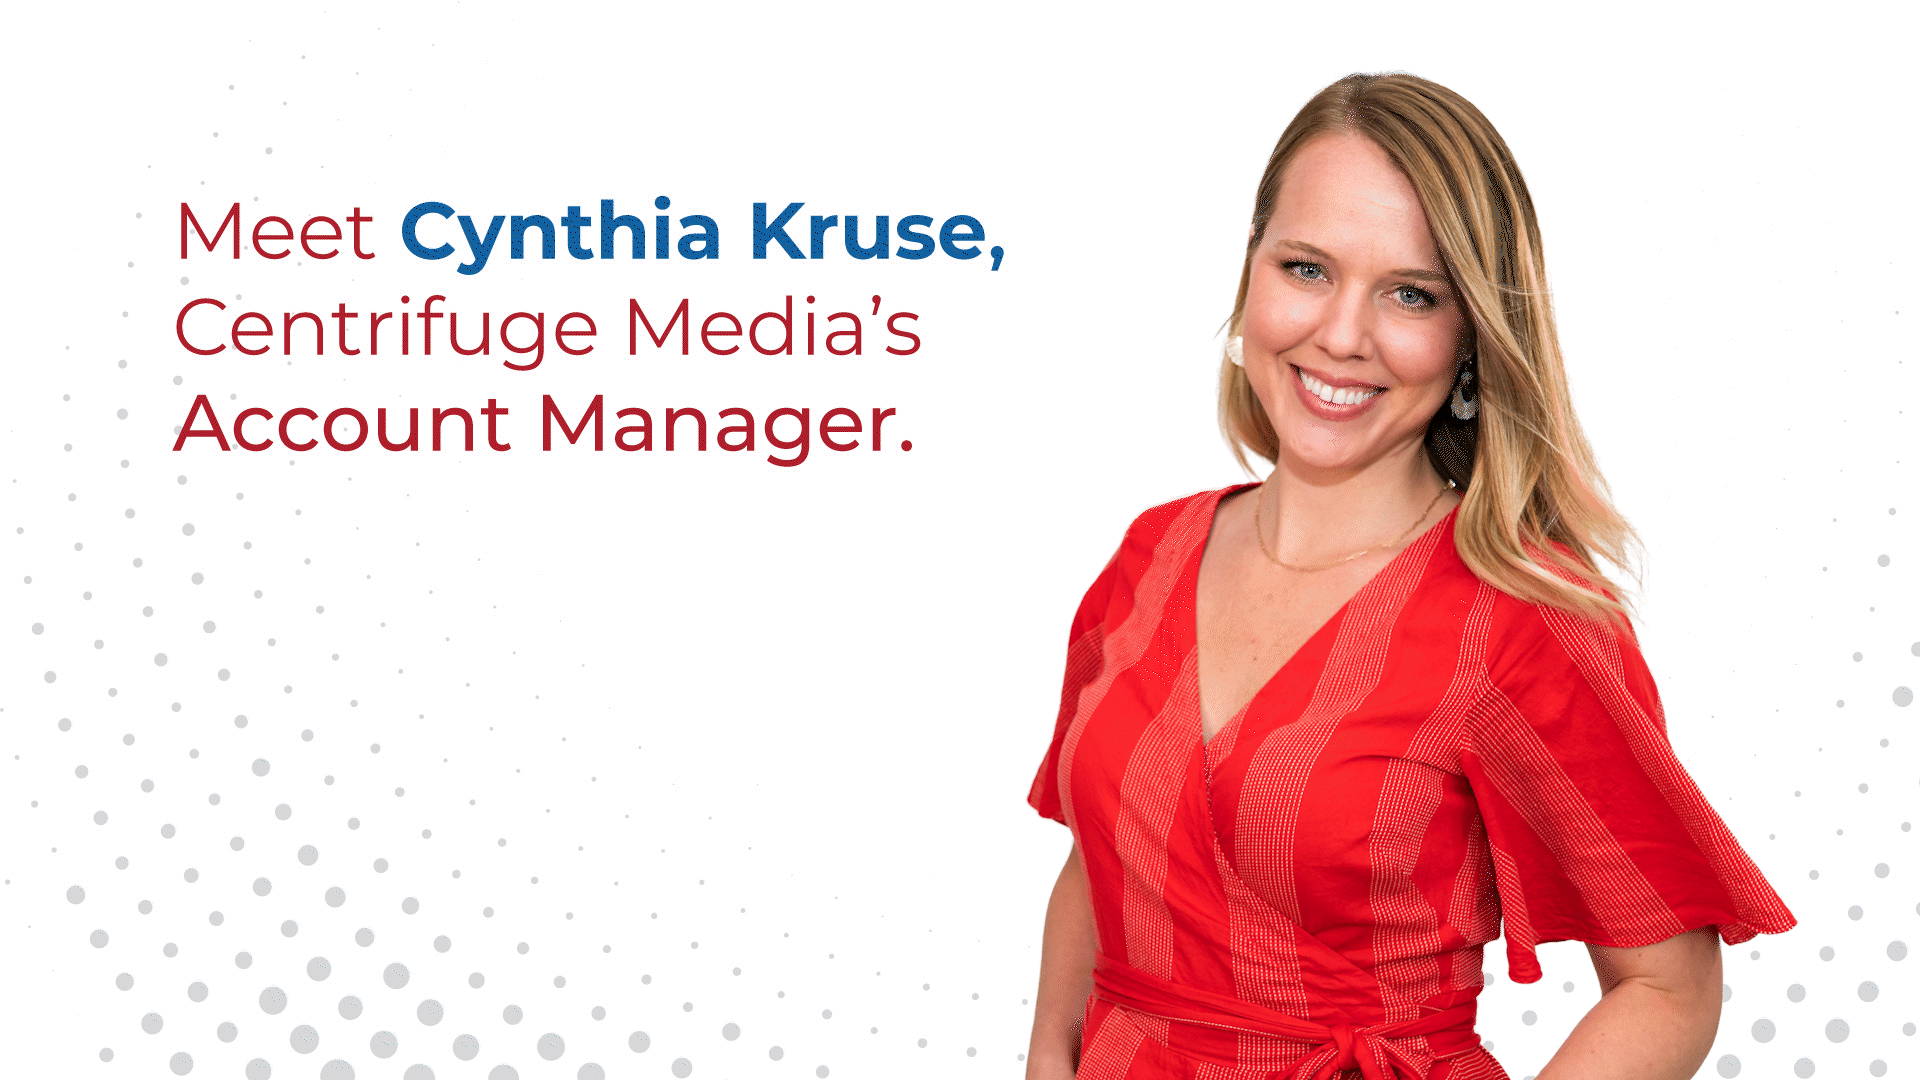 Q&A with Cynthia Kruse: Account Manager